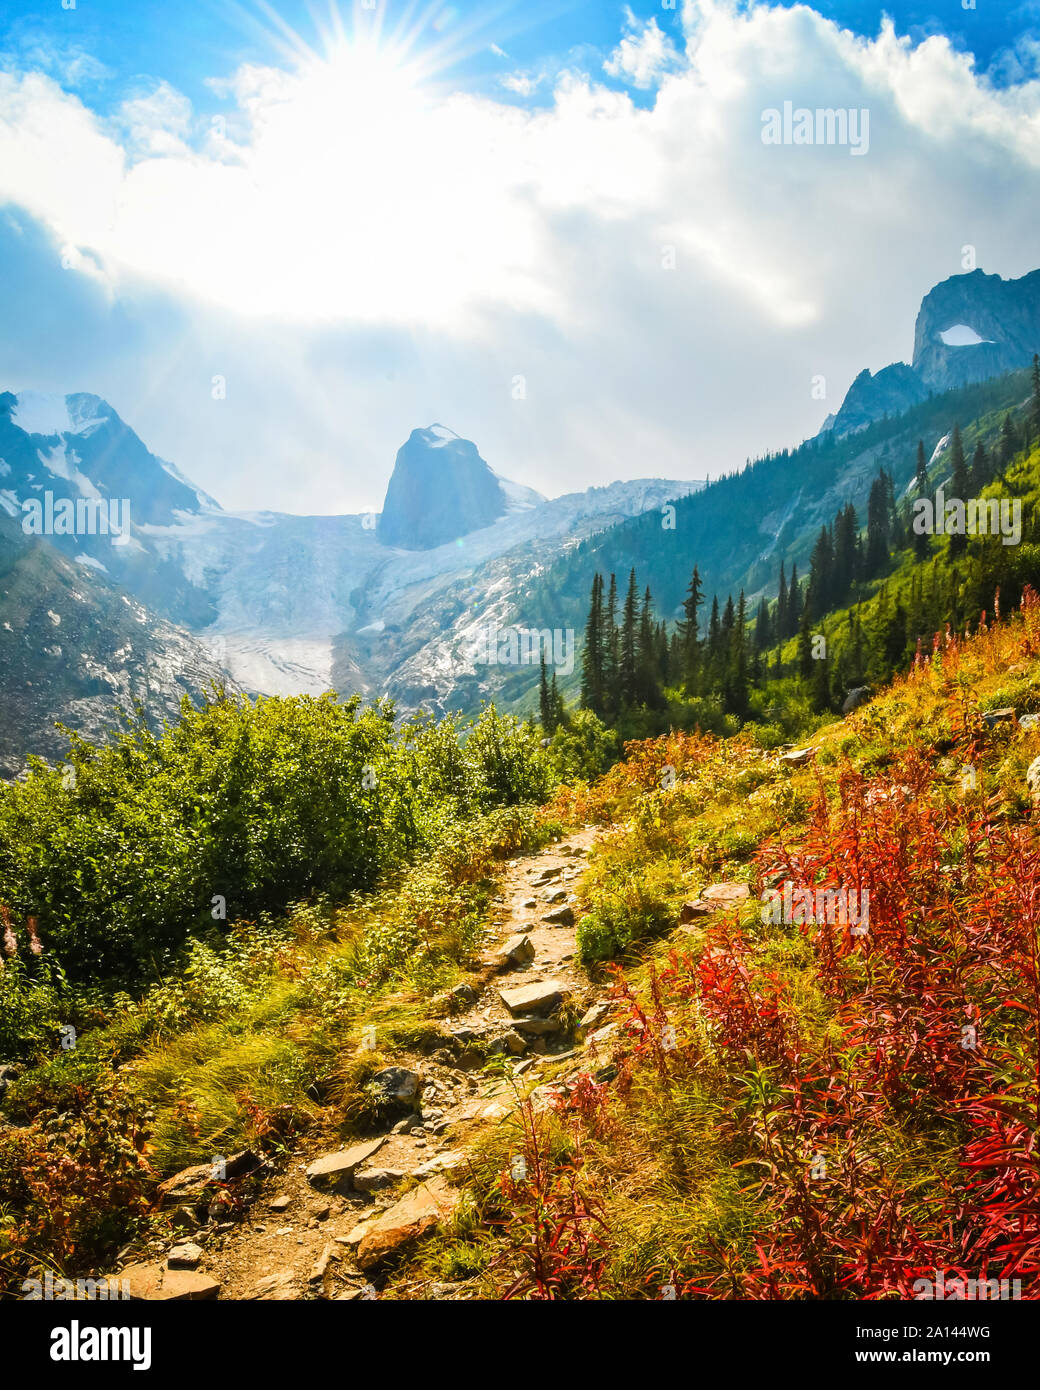 The Spires in Bugaboo Provincial Park, British Columbia, Canada on a sunny fall autumn day Stock Photo